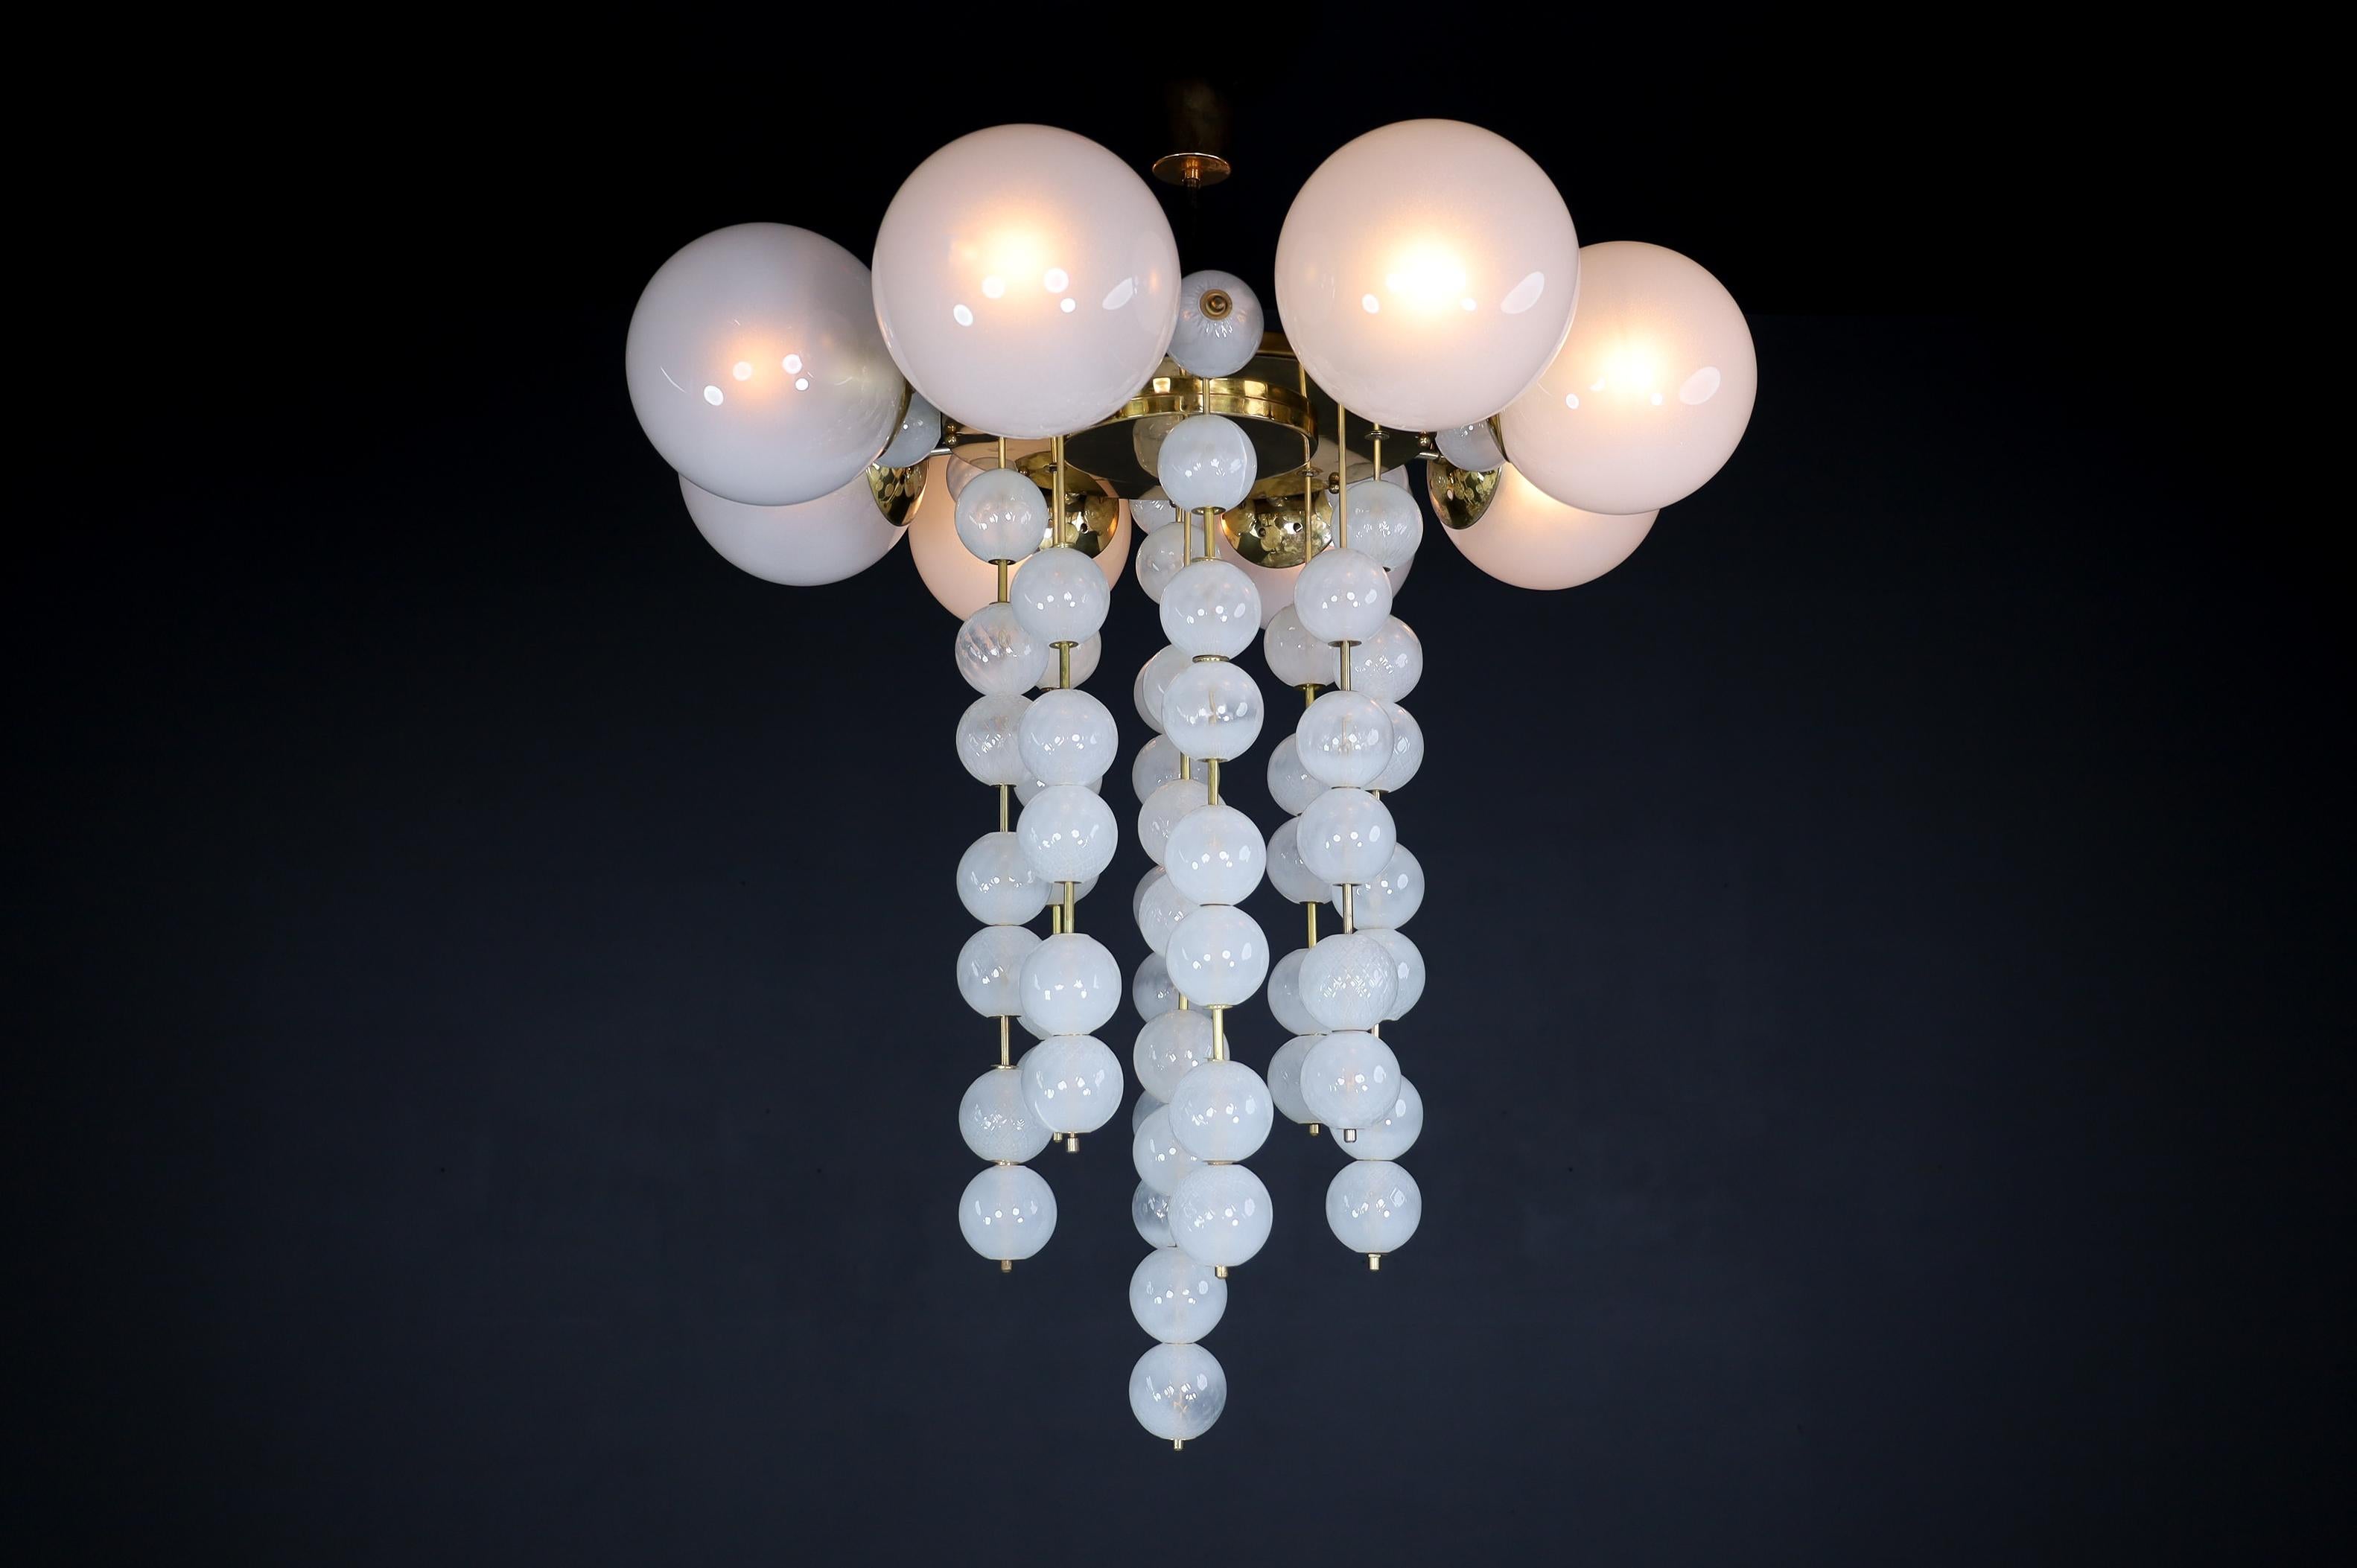 Czech Grand Chandelier with Brass Fixture and Hand-blowed Frosted Glass Globes, 1960s For Sale